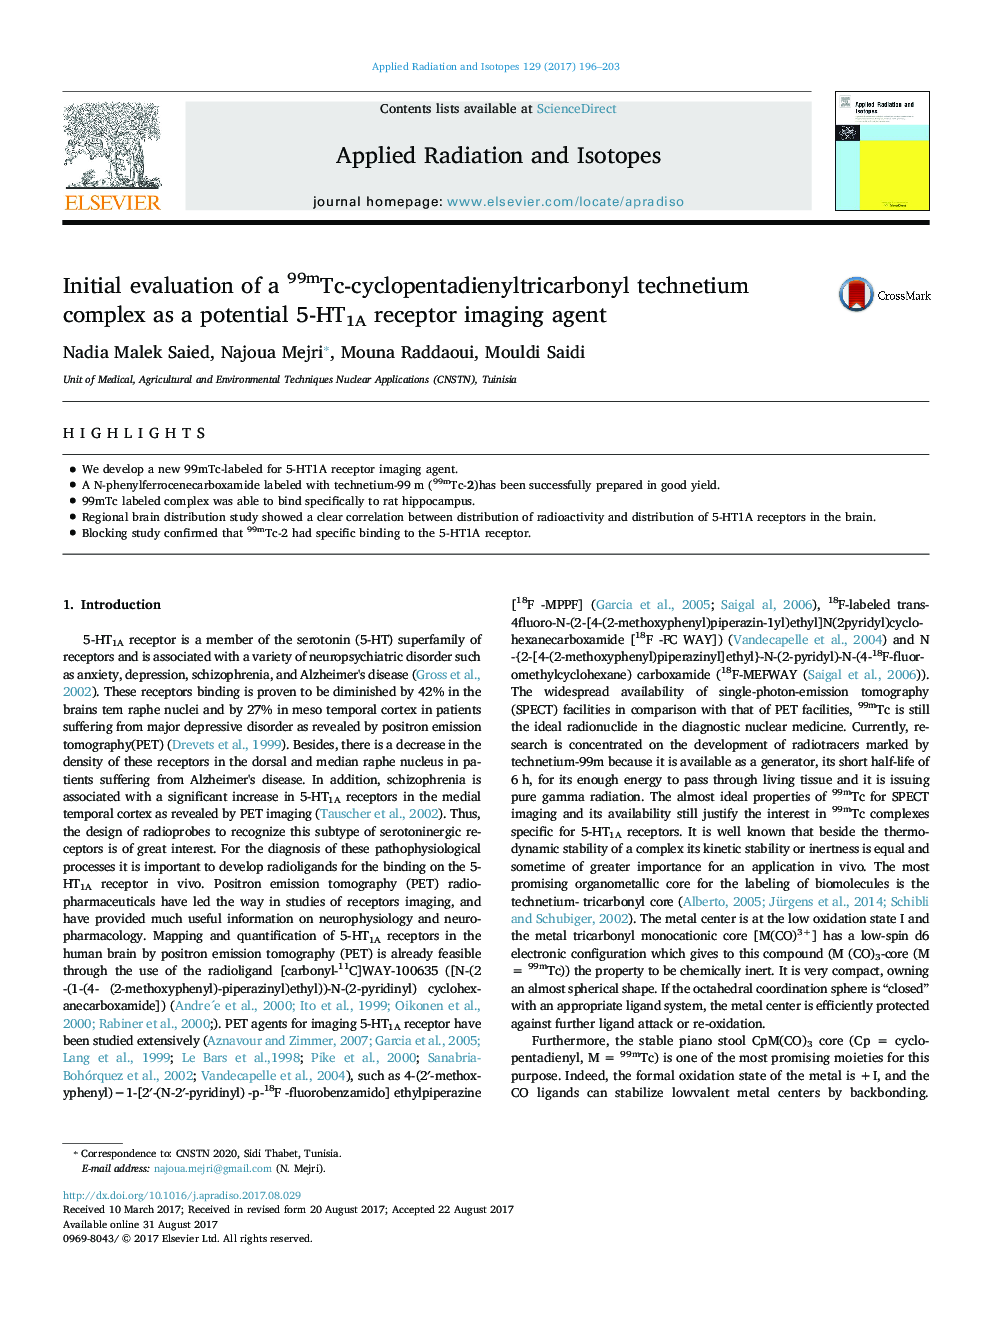 Initial evaluation of a 99mTc-cyclopentadienyltricarbonyl technetium complex as a potential 5-HT1A receptor imaging agent